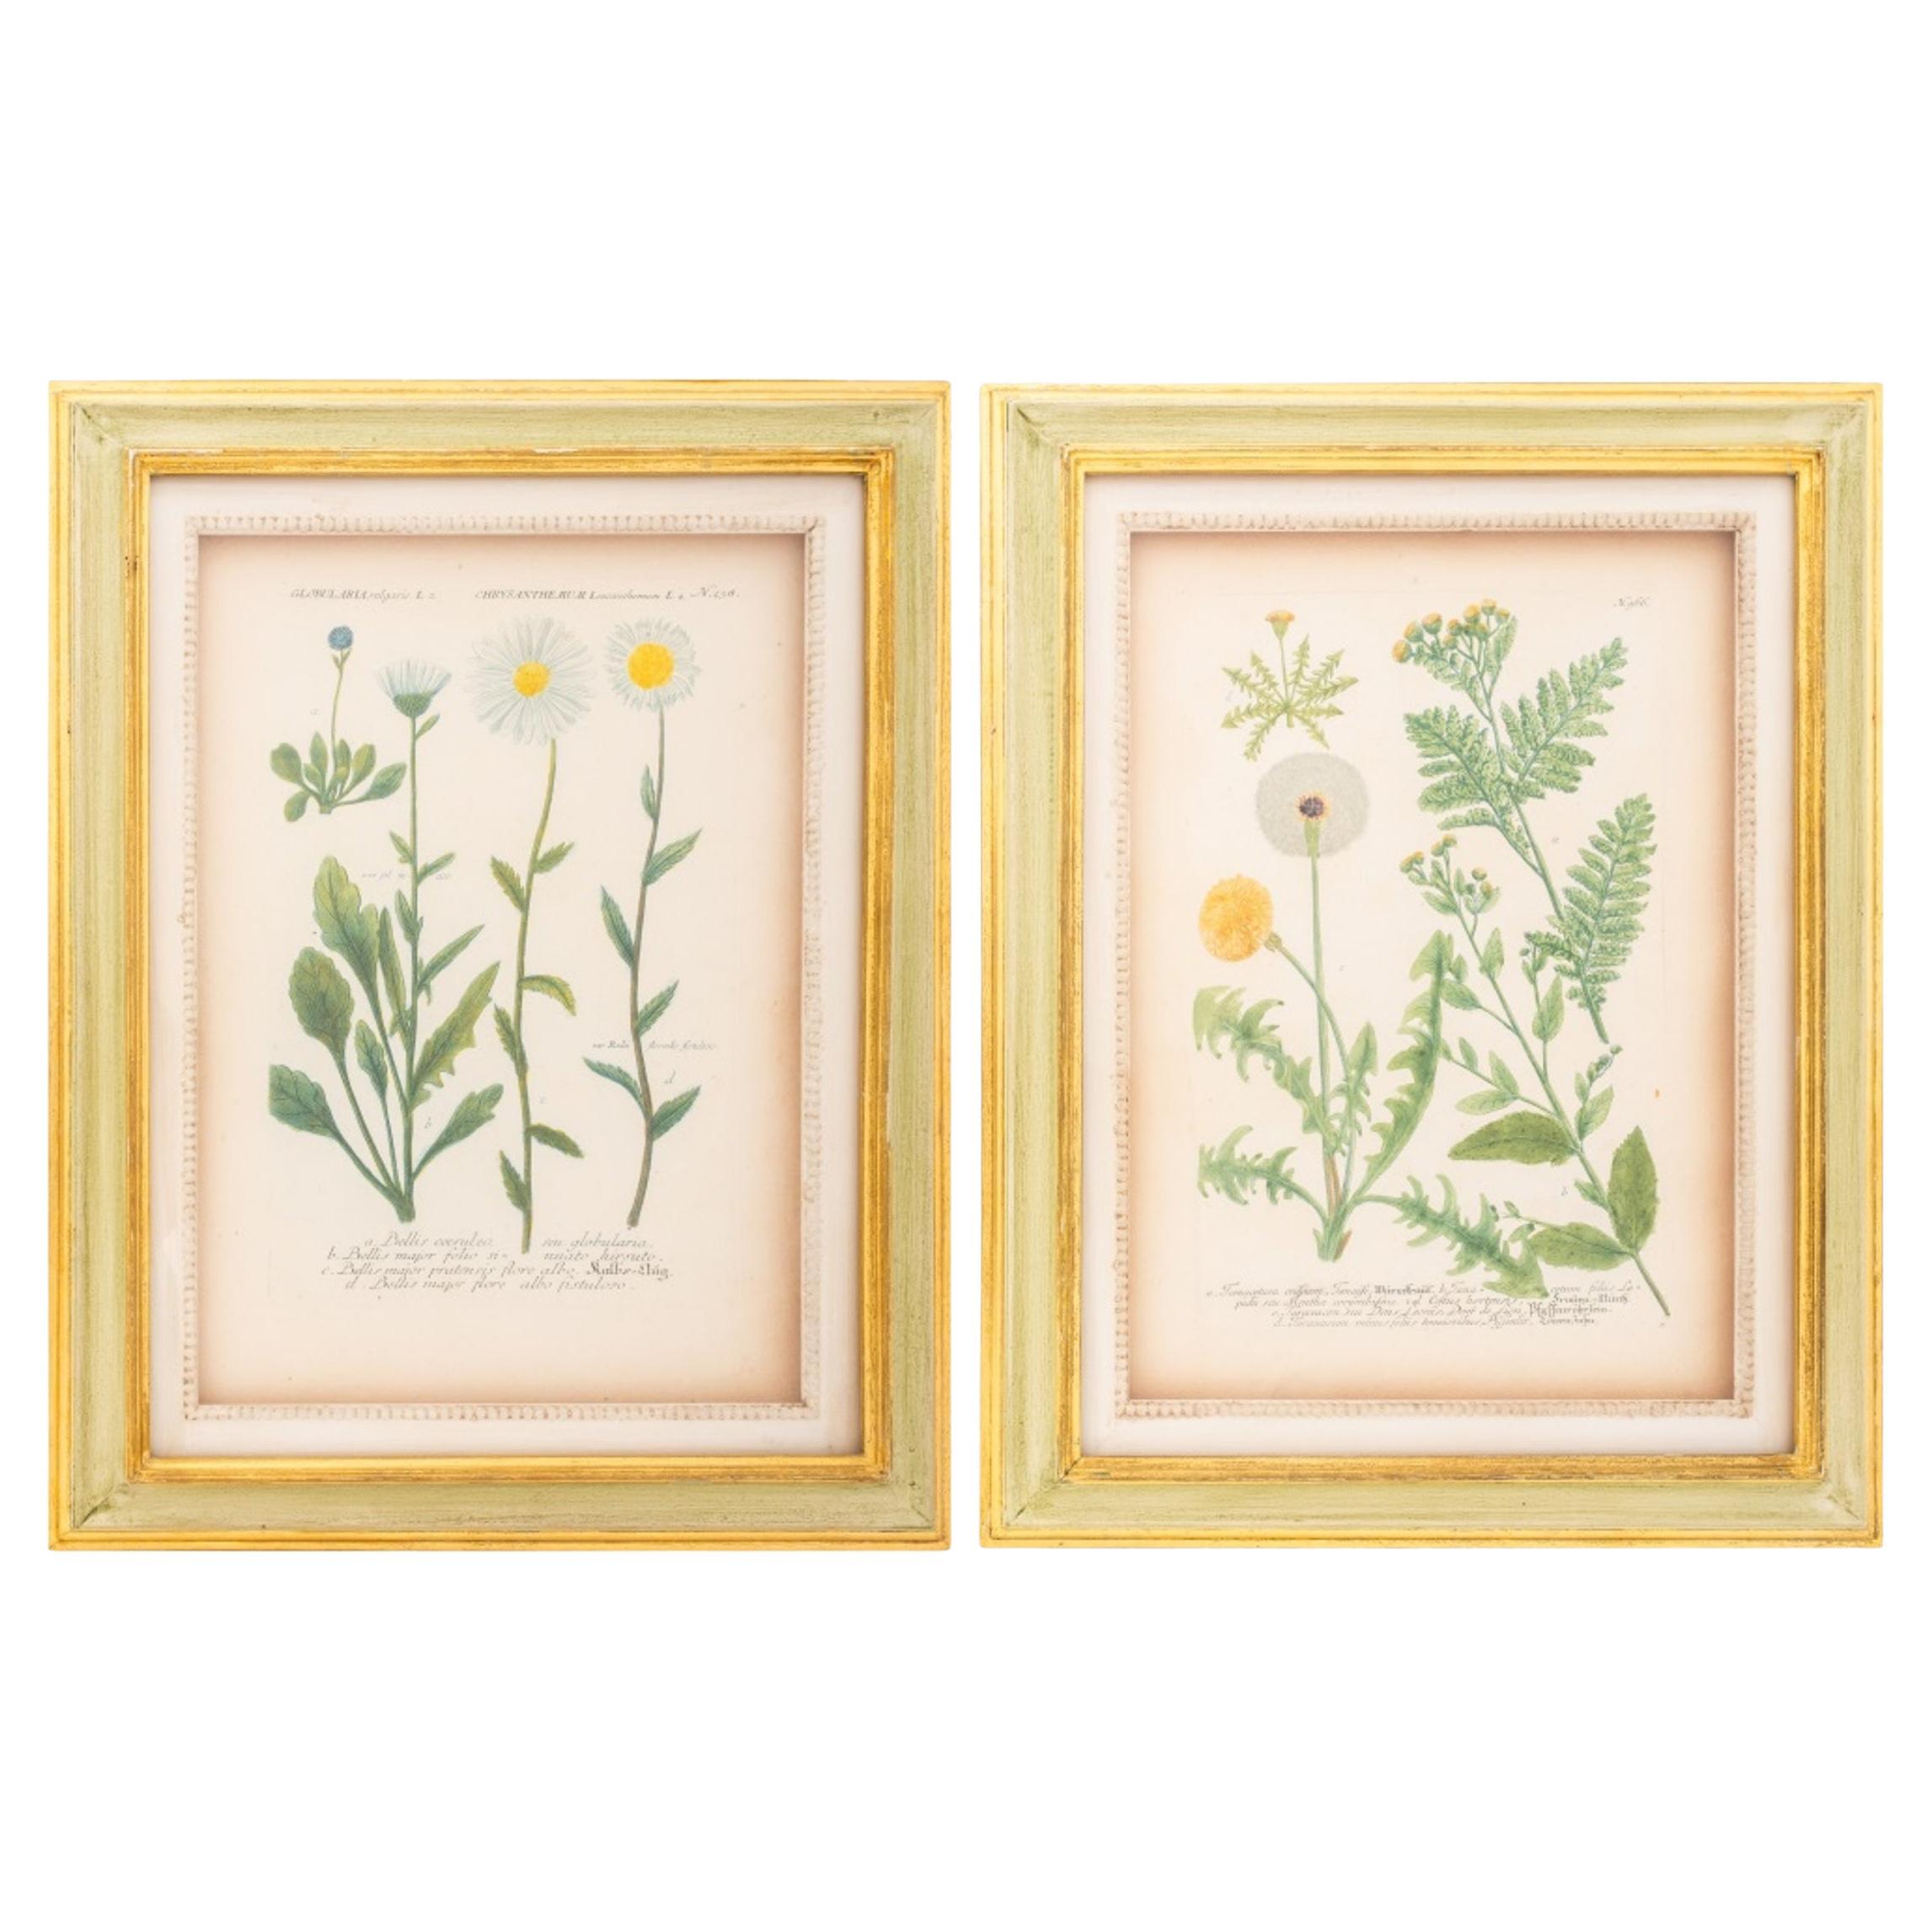 Hand-Colored Botanical Engravings on Laid Paper, Pair